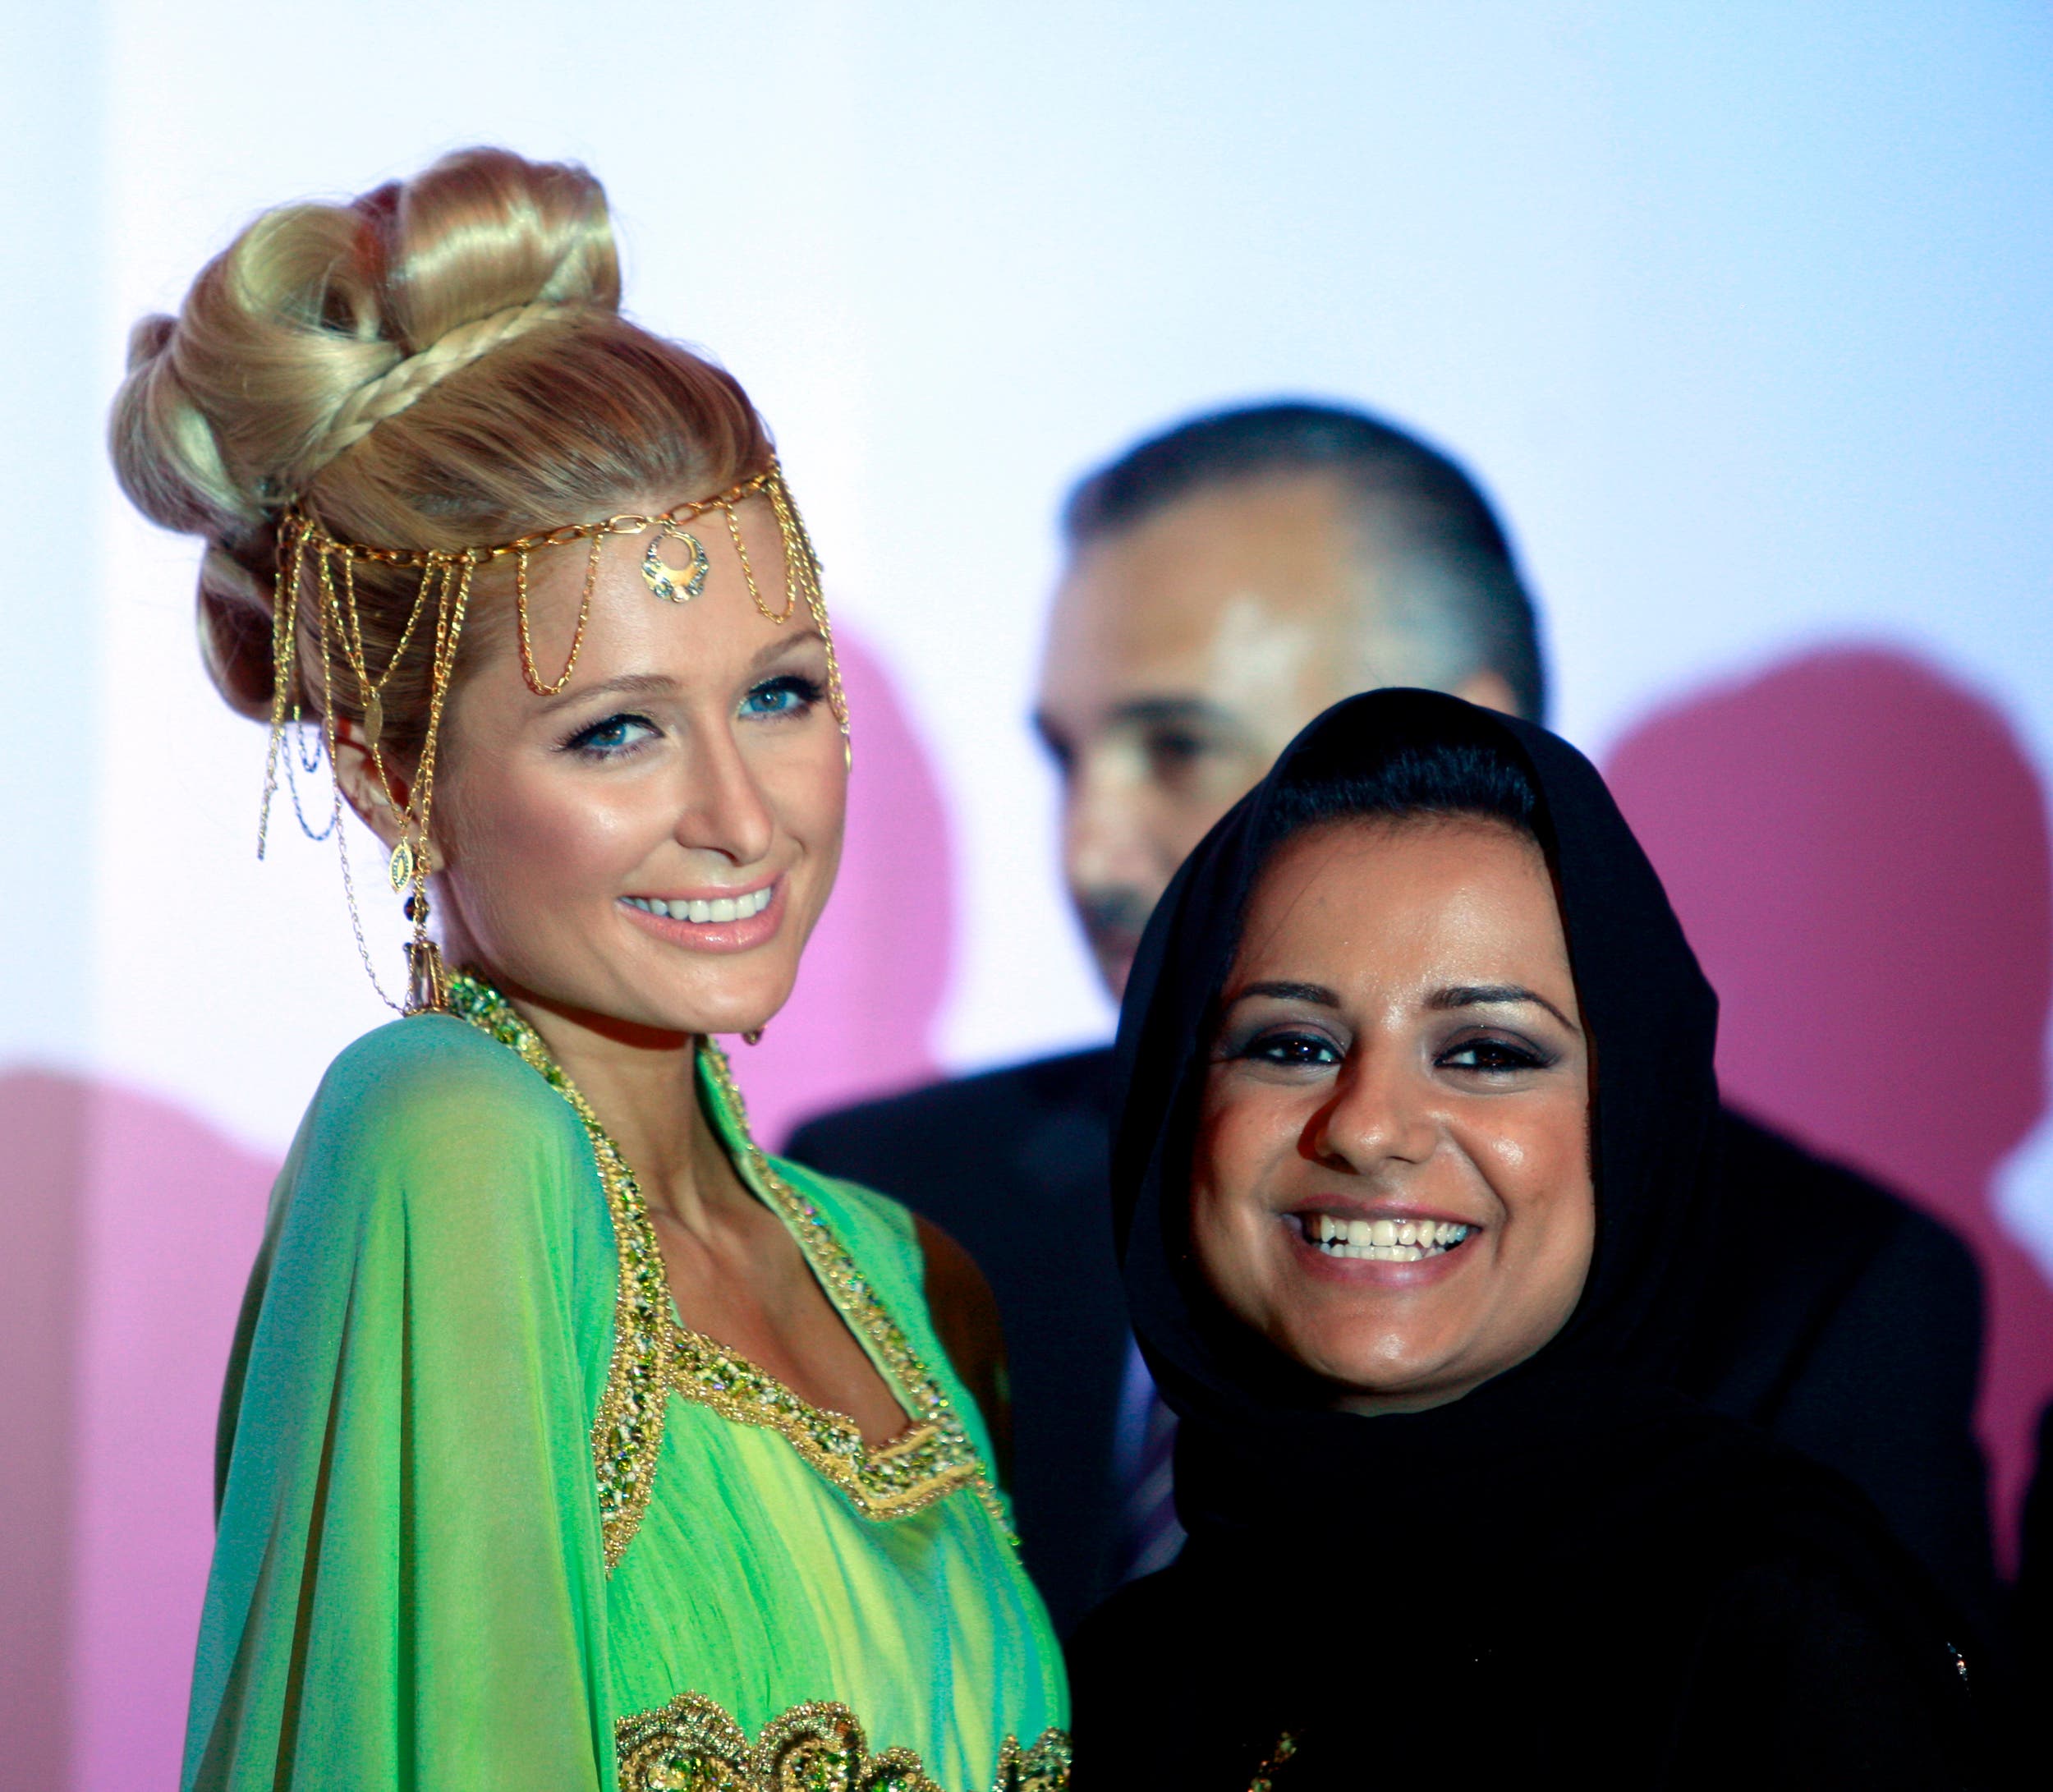 Paris Hilton with Nayla al-Khaja, chief executive officer of UAE-based D-Seven Motion Pictures production company, during a news conference in Dubai on June 17, 2009. (Reuters)